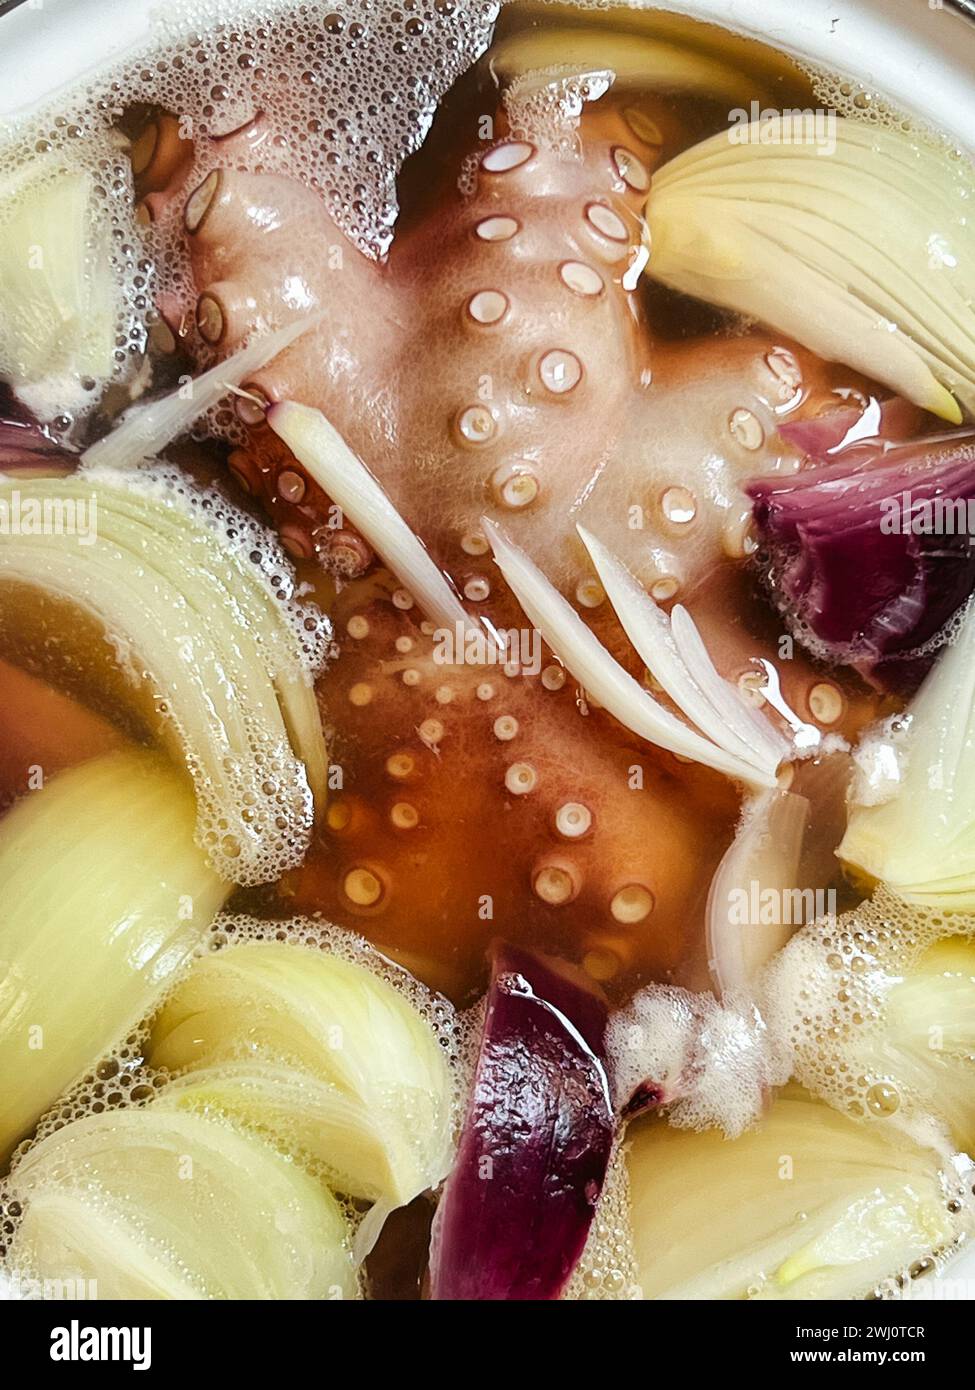 Octopus tentacles with onion pieces boil in a saucepan Stock Photo